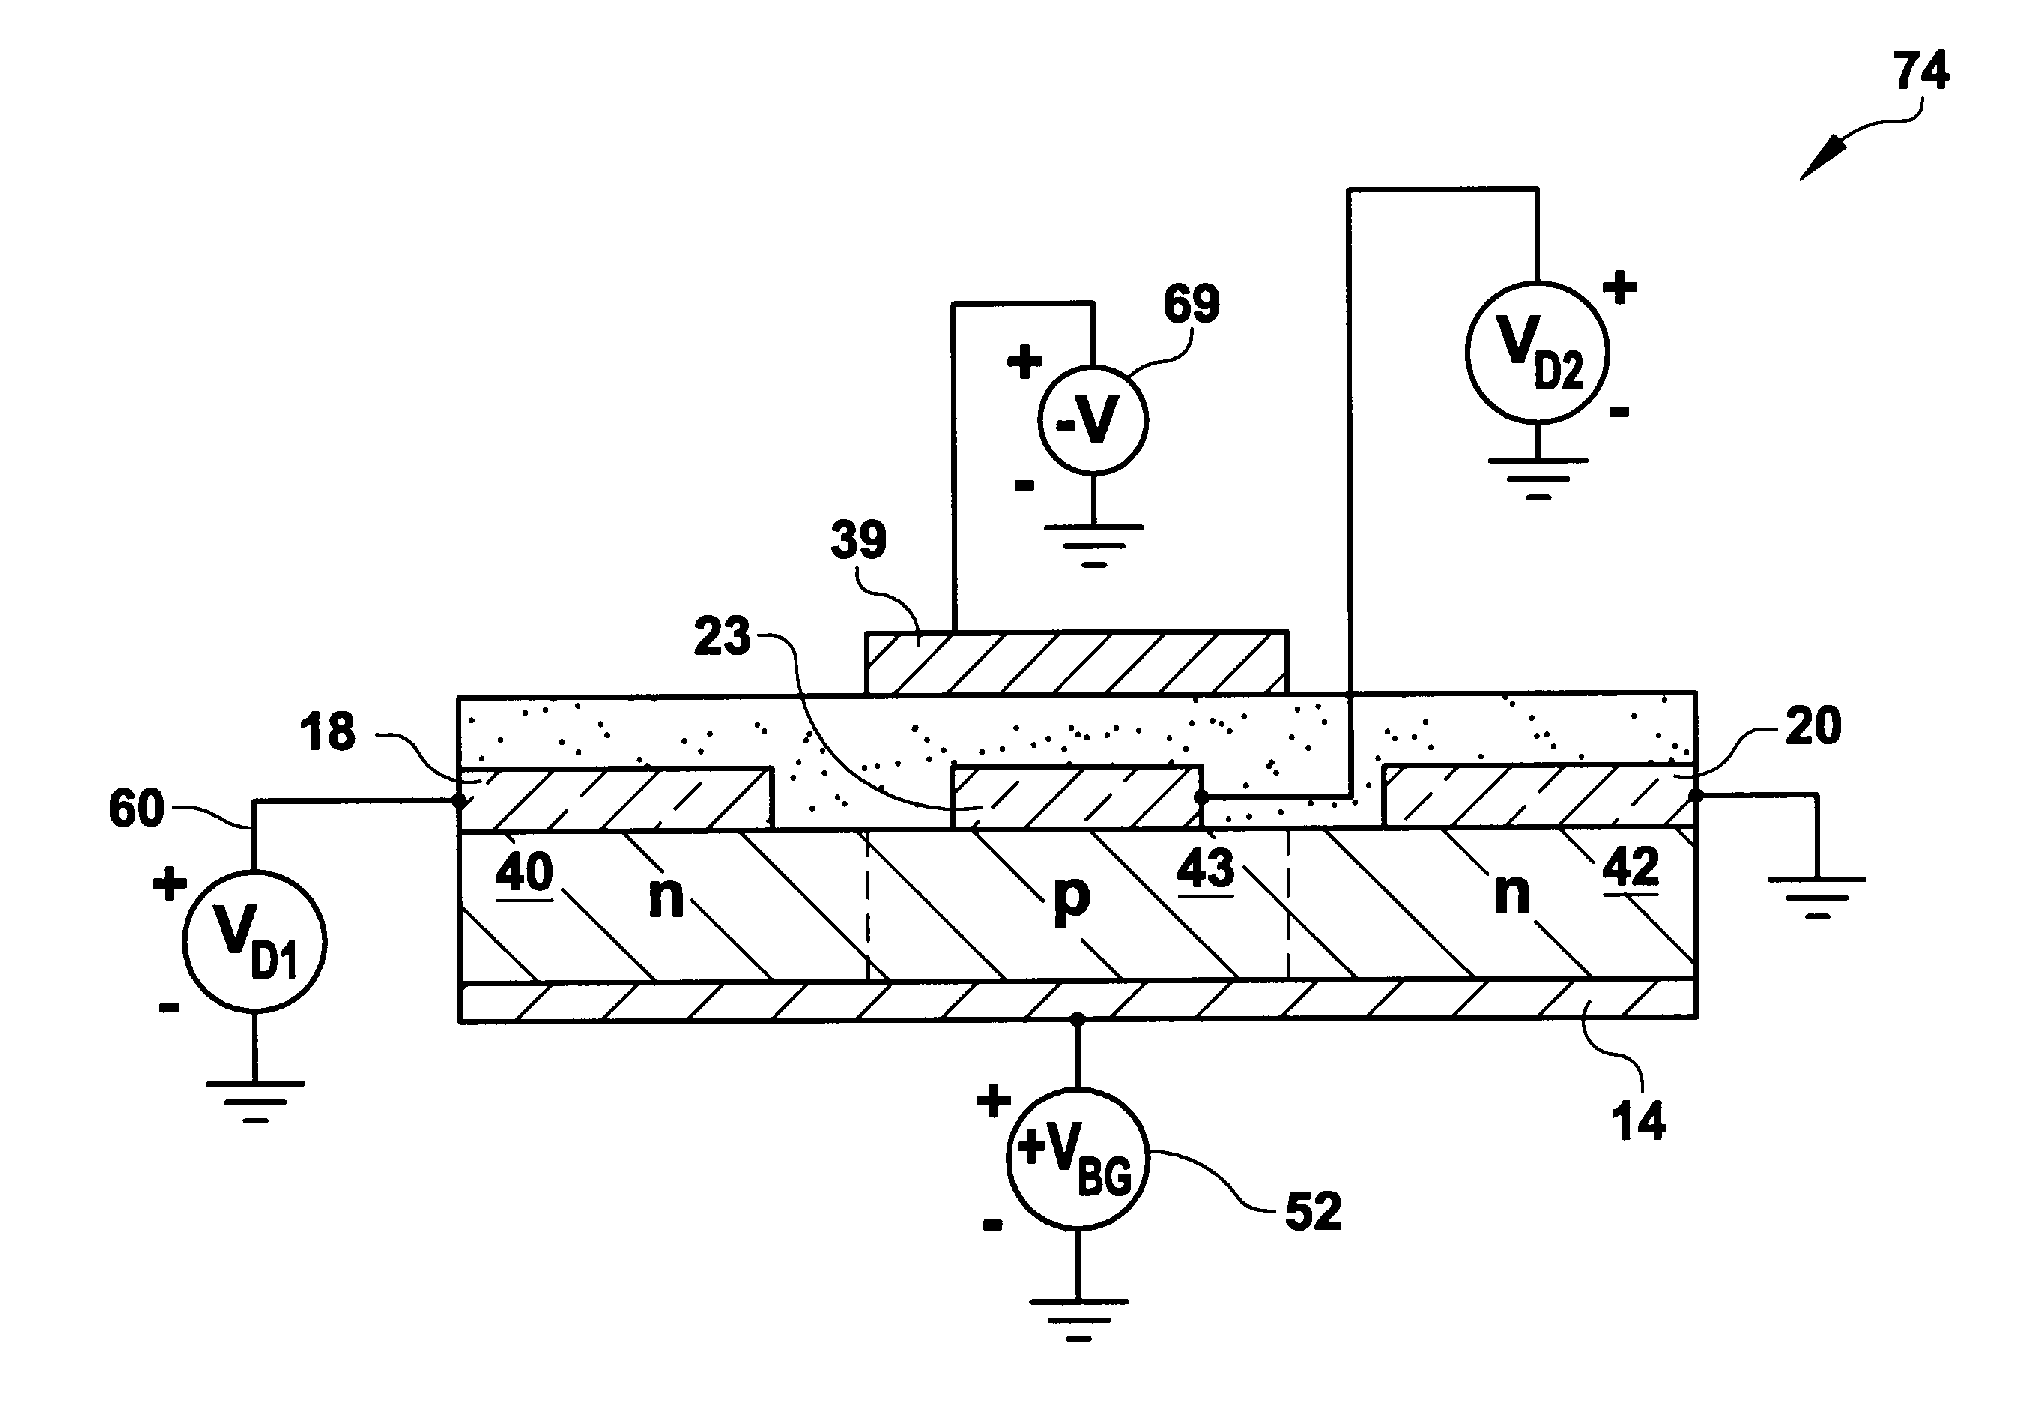 Microfabrication of Carbon-based Devices Such as Gate-Controlled Graphene Devices